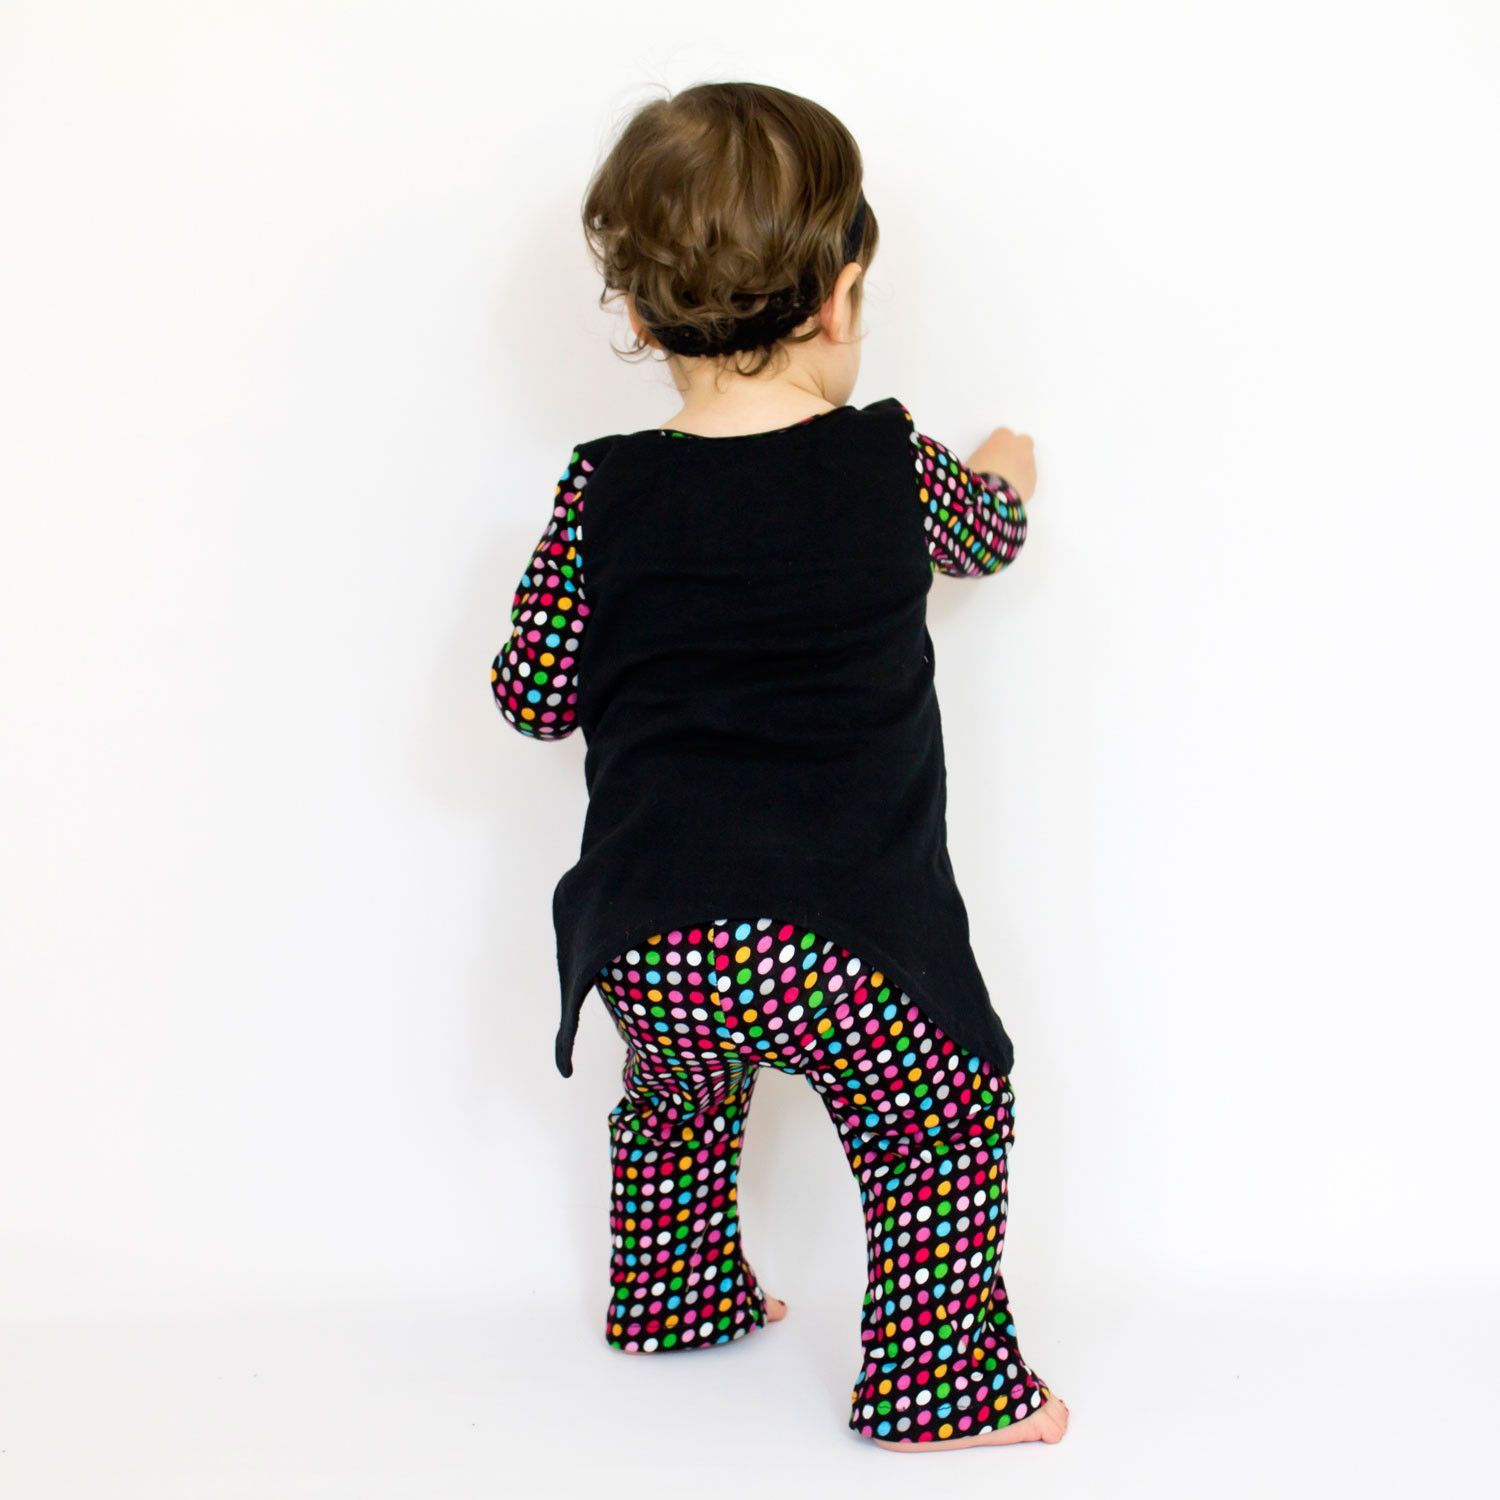 Baby/Toddler Bell Bottom Pants Sewing Pattern